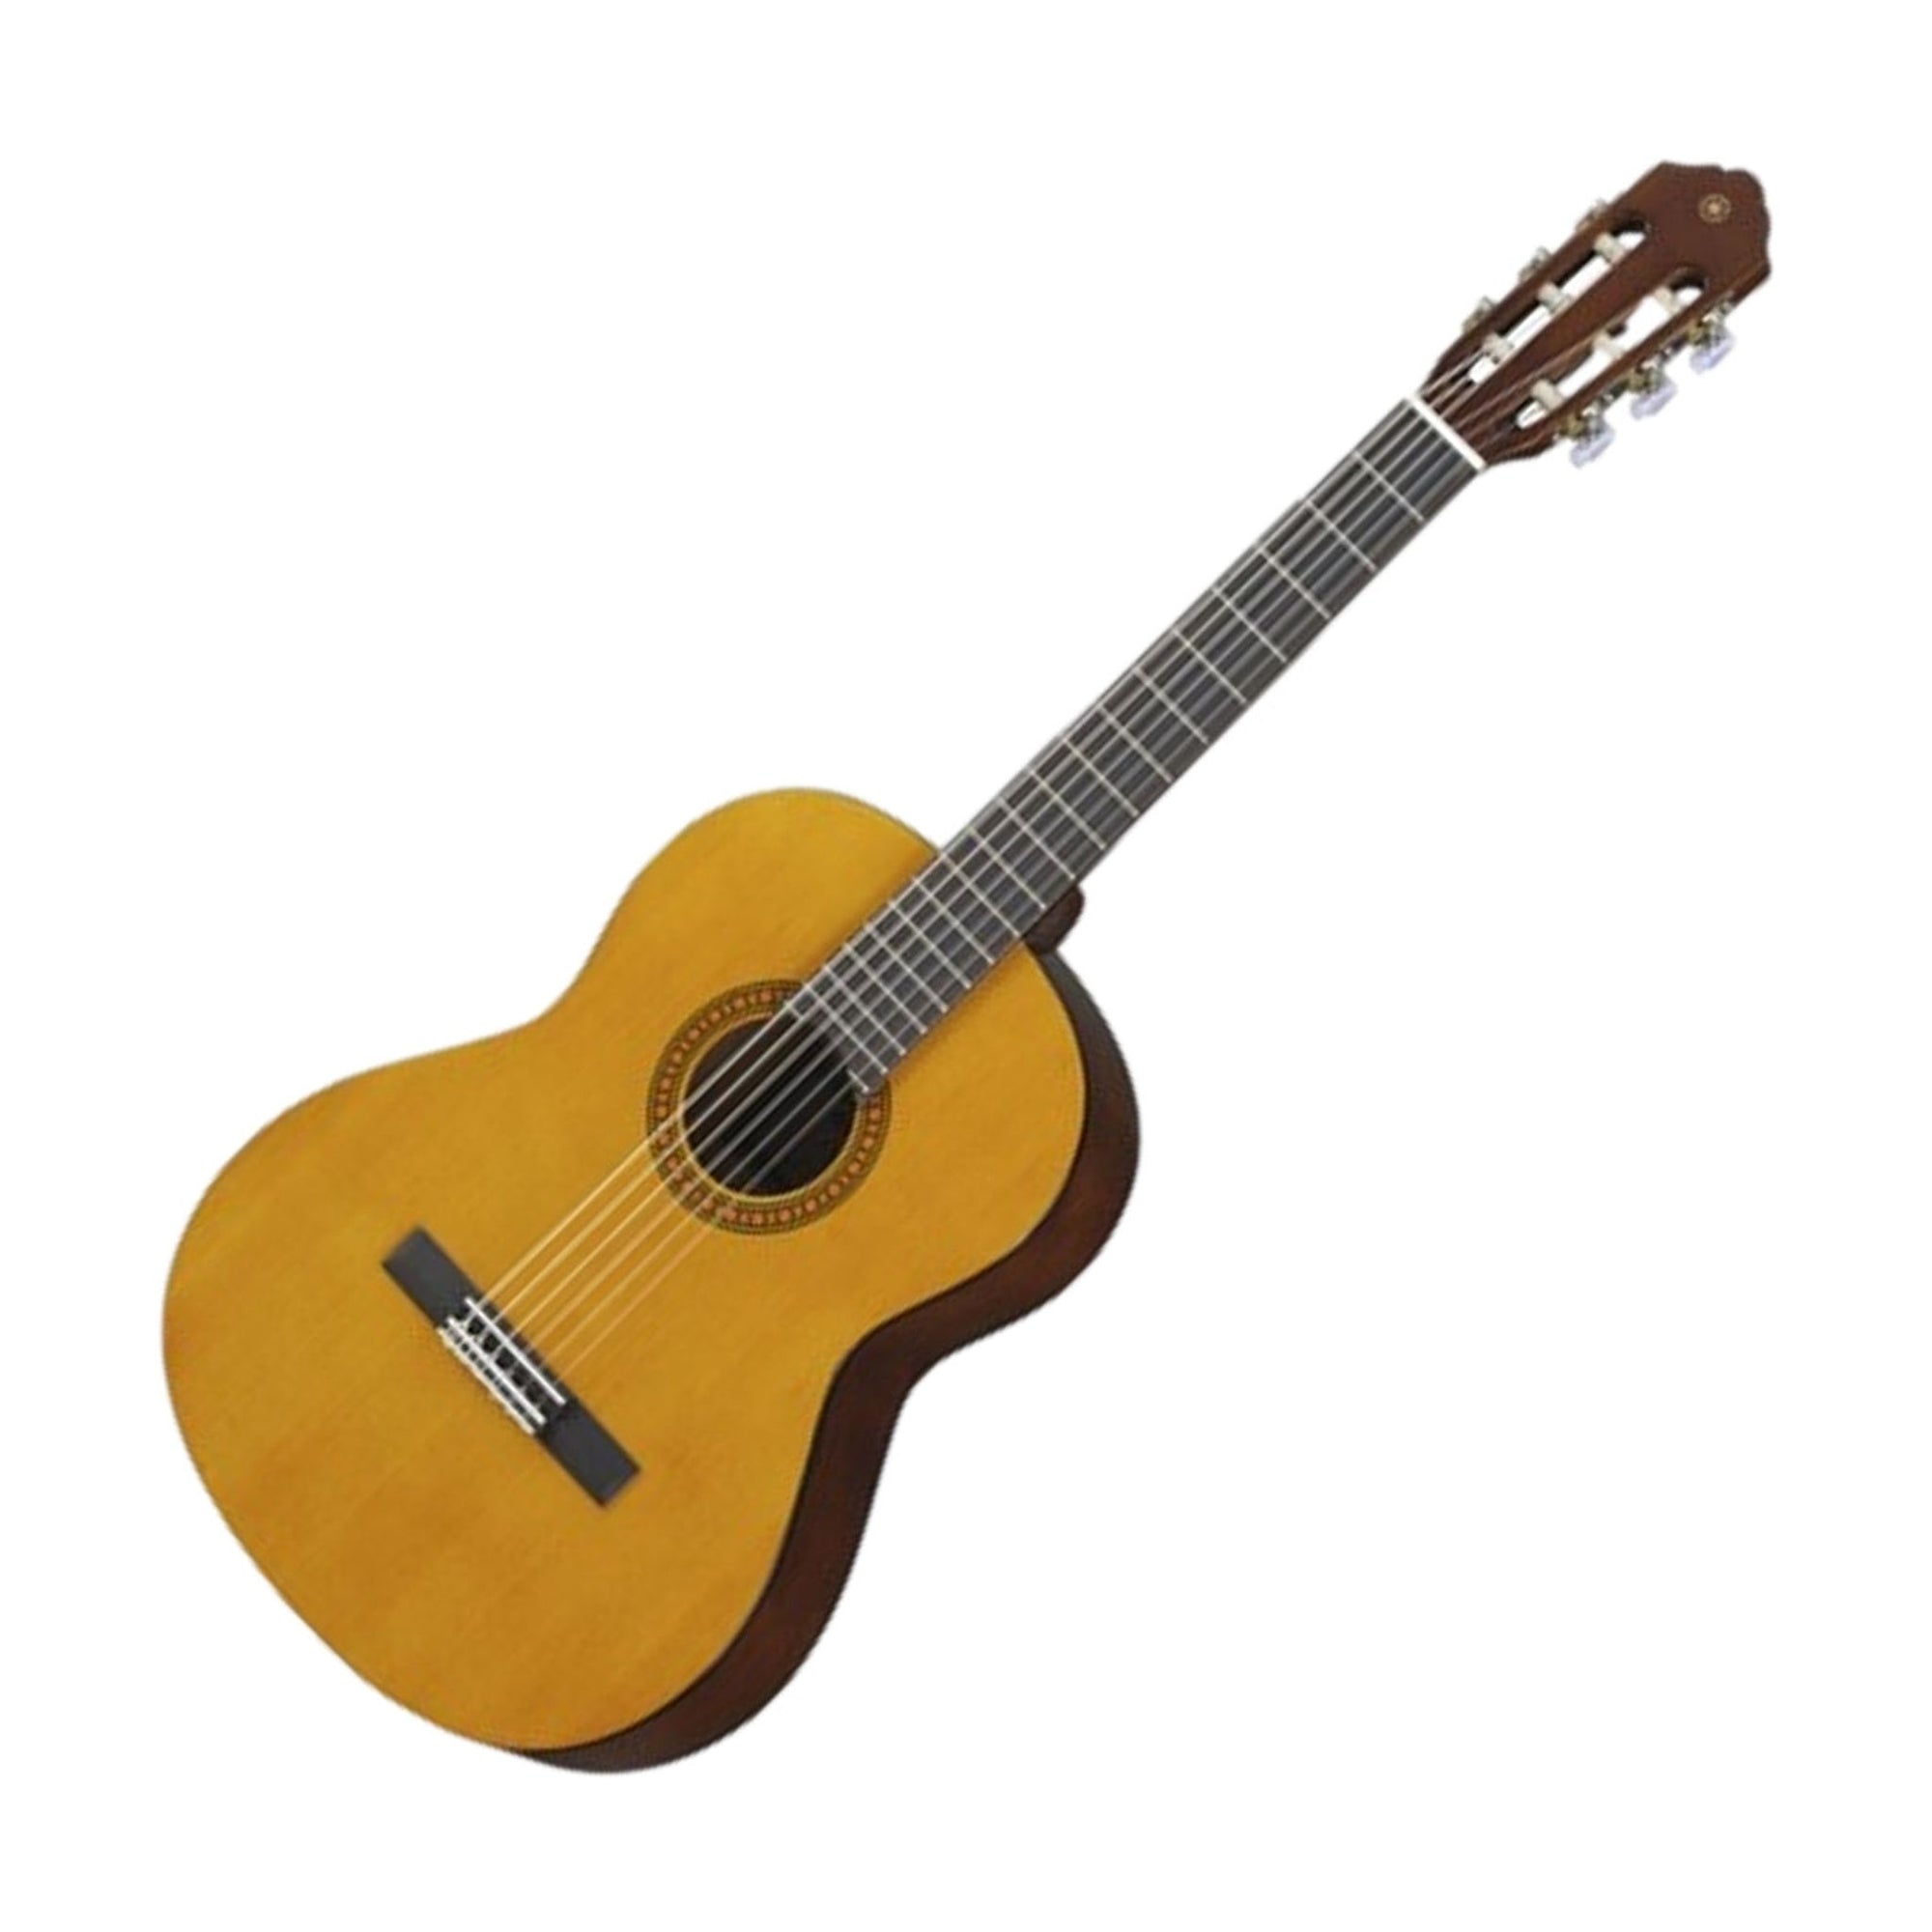 The Yamaha CS40 3/4 Classical Guitar is designed specifically for young learners which offers excellent playing comfort and a great sound.